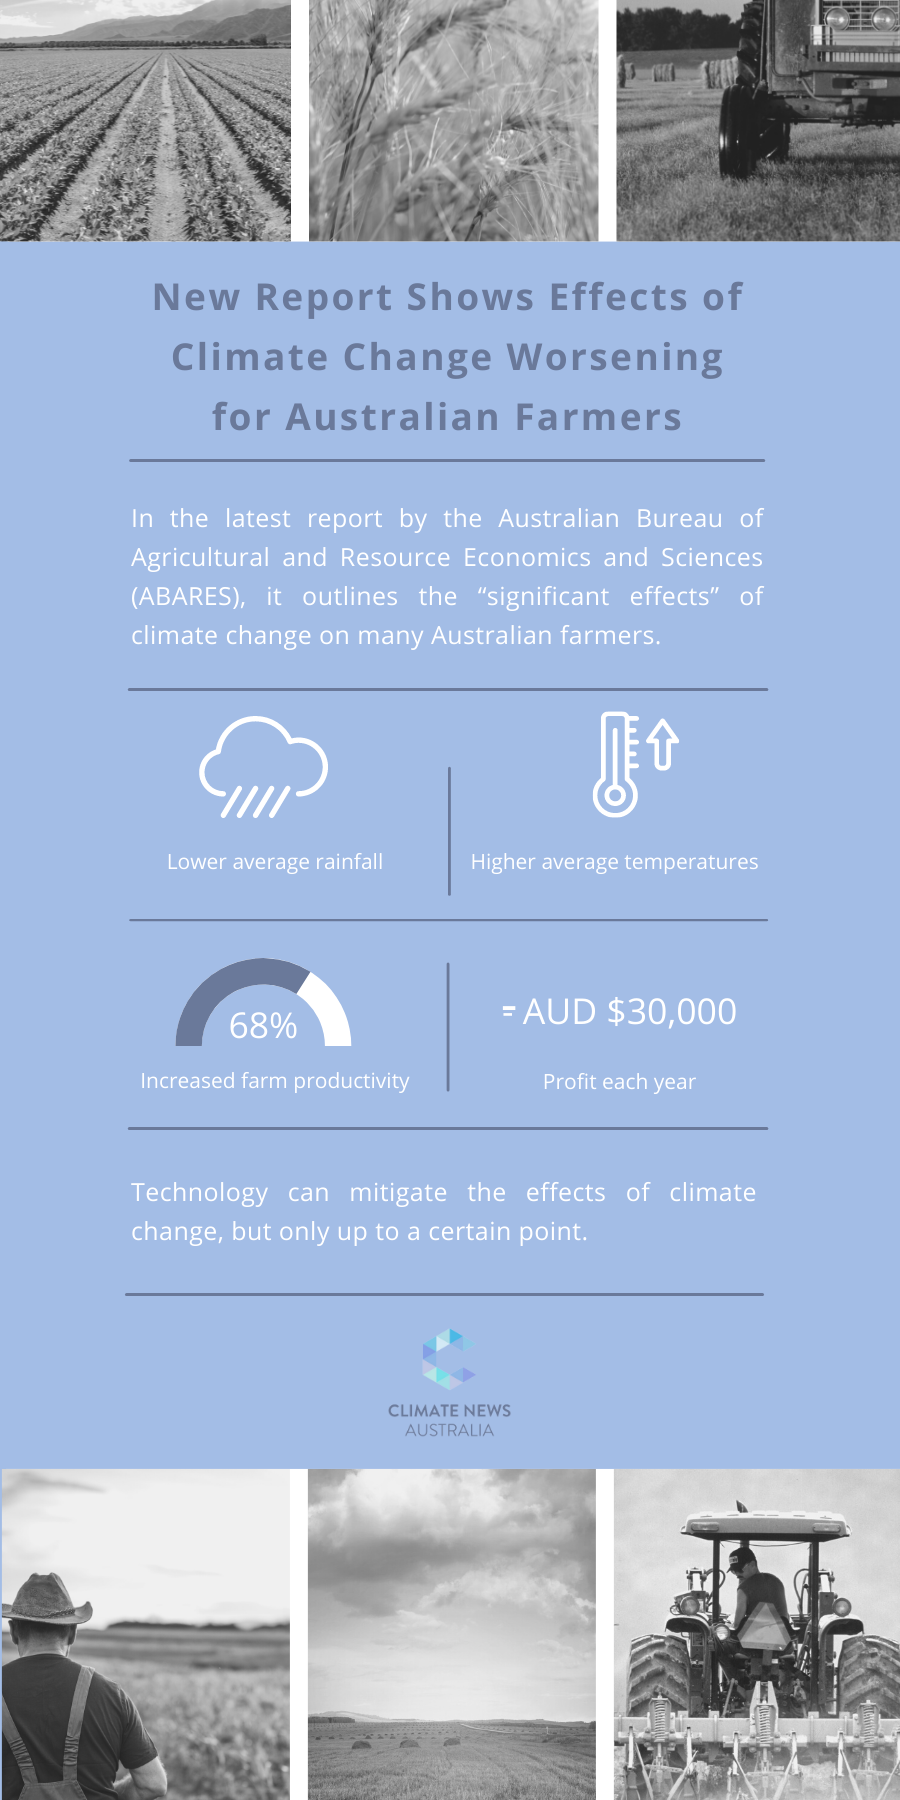 New Report Shows Effects of Climate Change Worsening for Australian Farmers